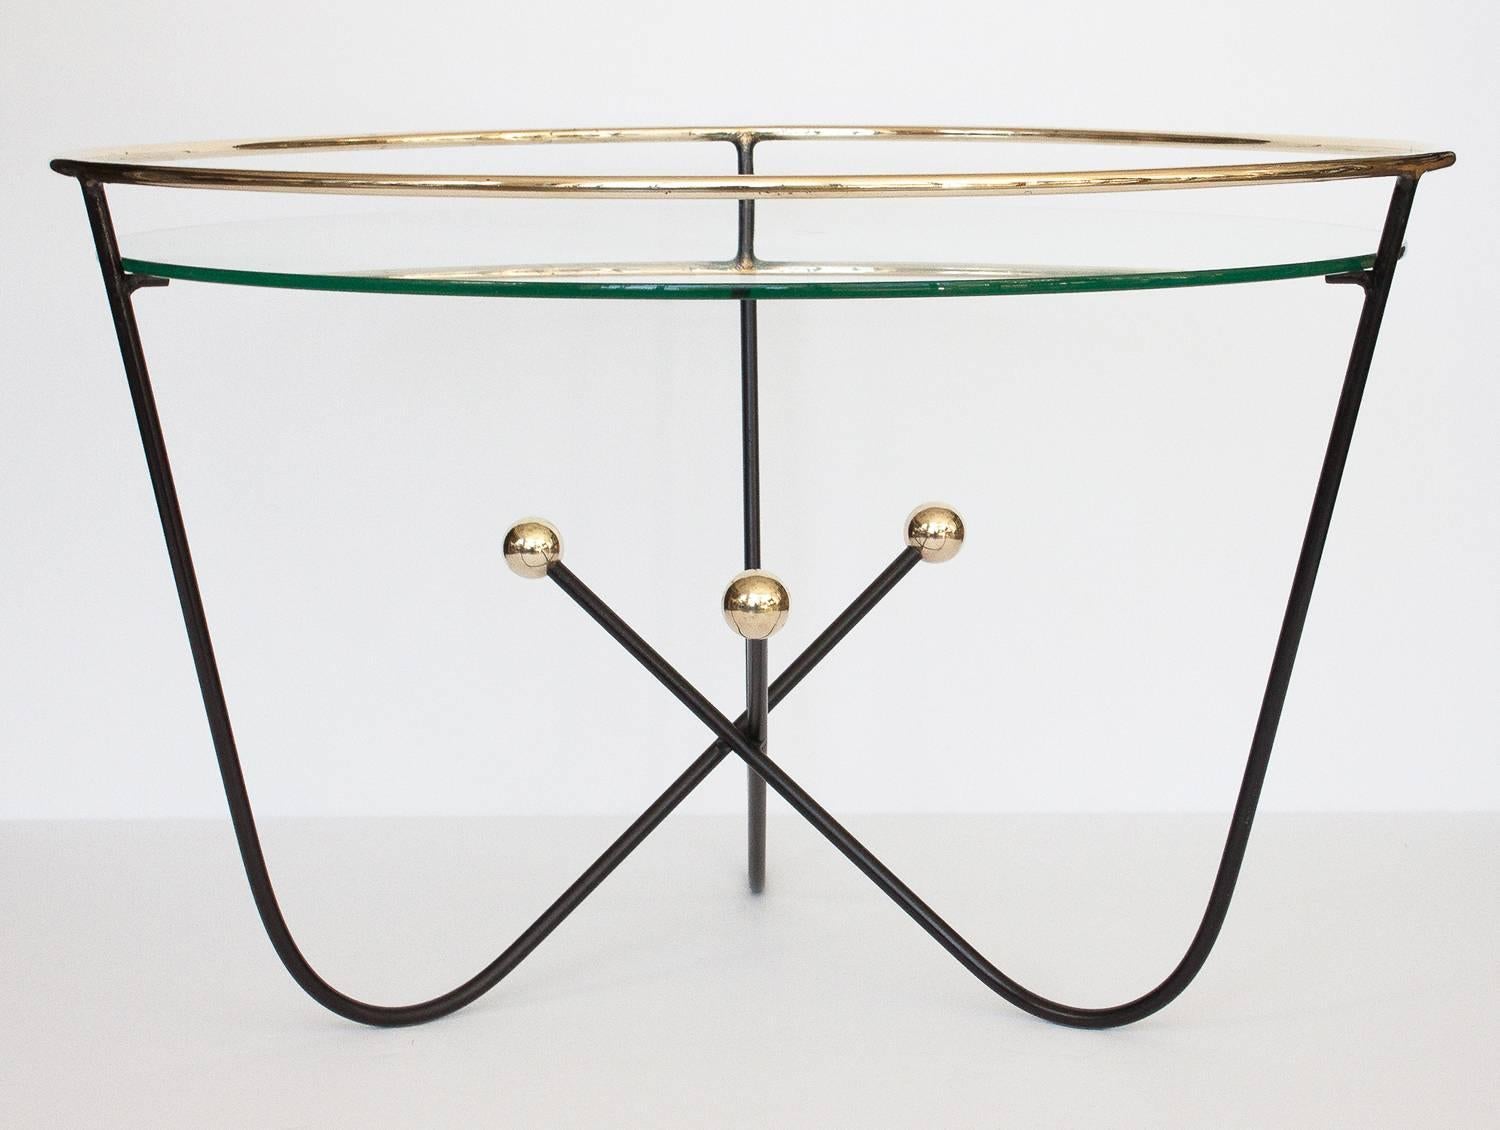 1950s Jean Royère style, black enamel and brass cocktail or side table by Edward Ihnatowicz for Mars Furniture. Elevated solid brass gallery rail above the 24.5" inset glass top. Three black enameled wire legs curve down, gather and cross at